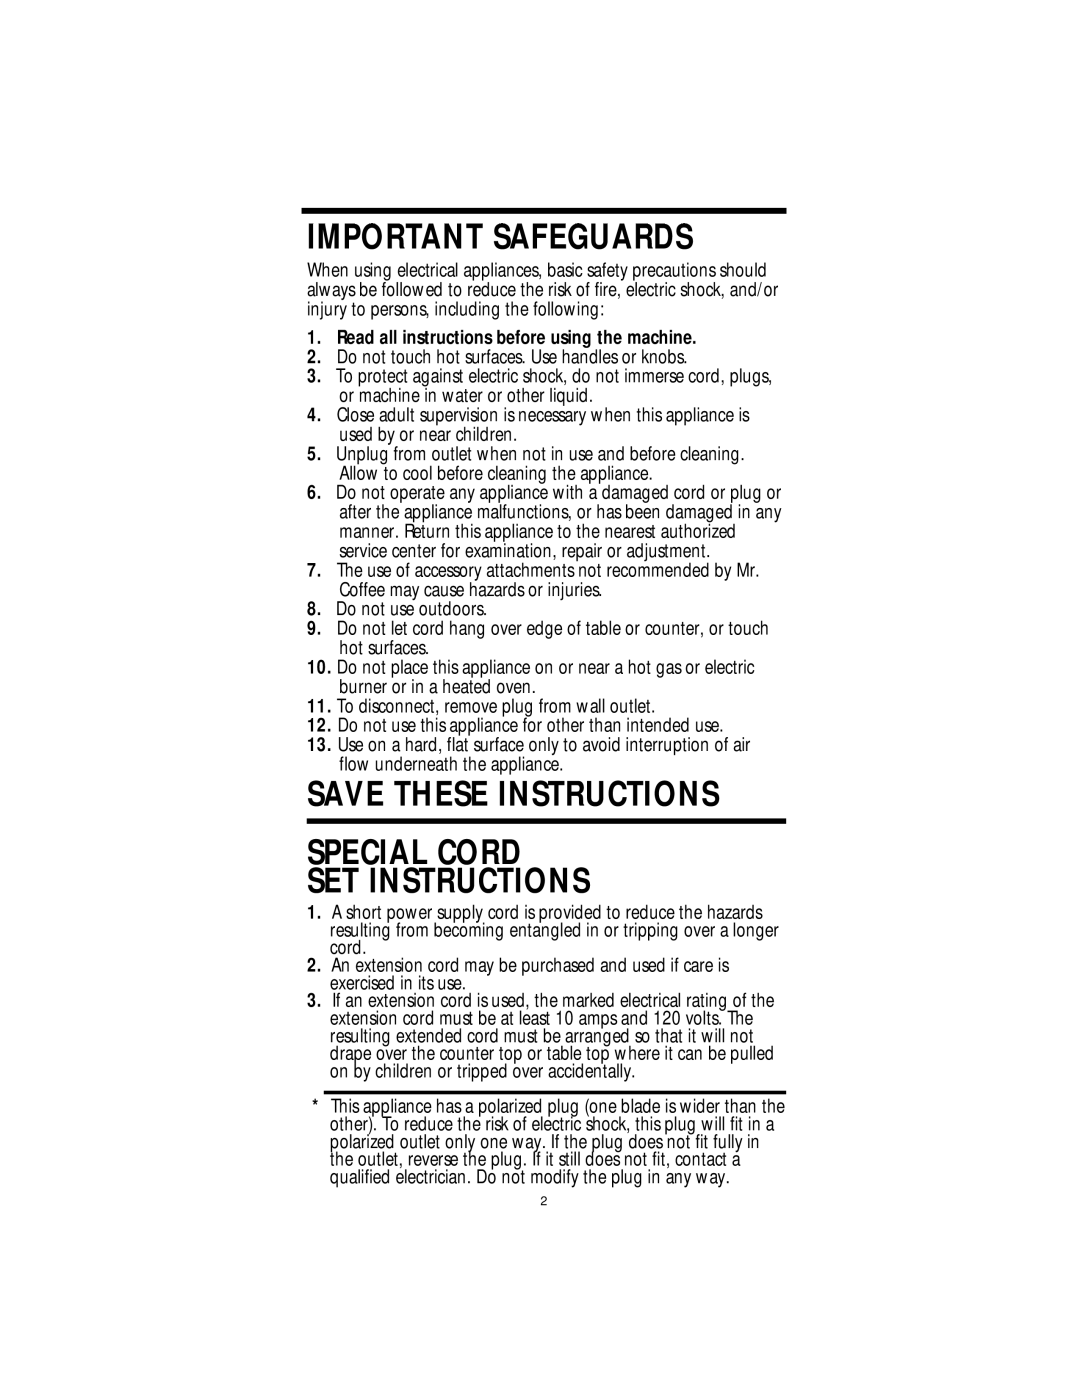 Mr. Coffee HC4 operating instructions Important Safeguards, Save These Instructions Special Cord Set Instructions 